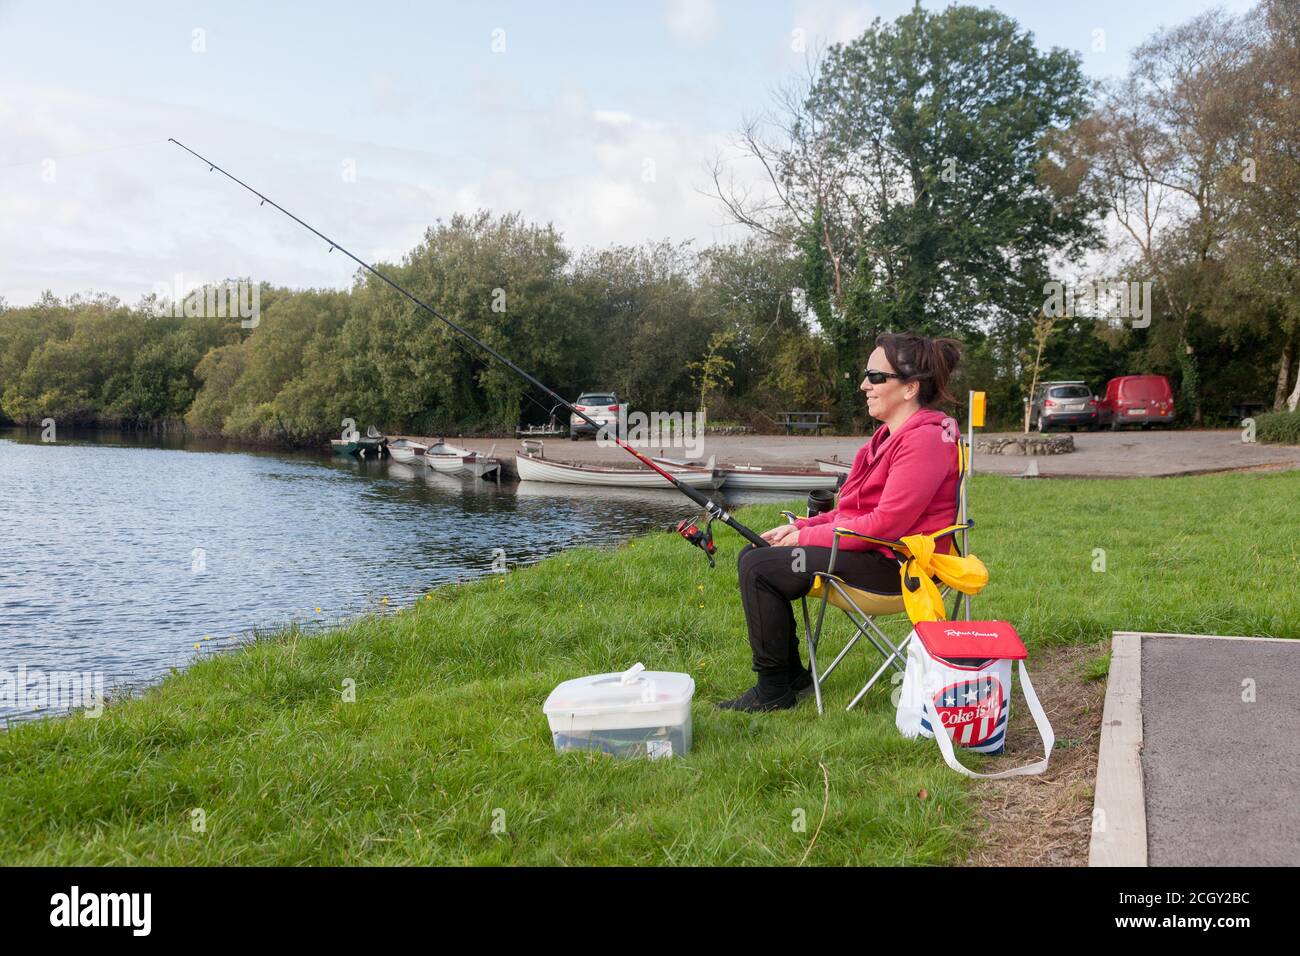 Inchigeelagh, Cork, Ireland. 12th September, 2020. Clare O' Connor from Coachford spending a relaxing afternoon course fishing on Lough Aulla outside Inchigeelagh, Co. Cork, Ireland. - Credit; David Creedon / Alamy Live News Stock Photo